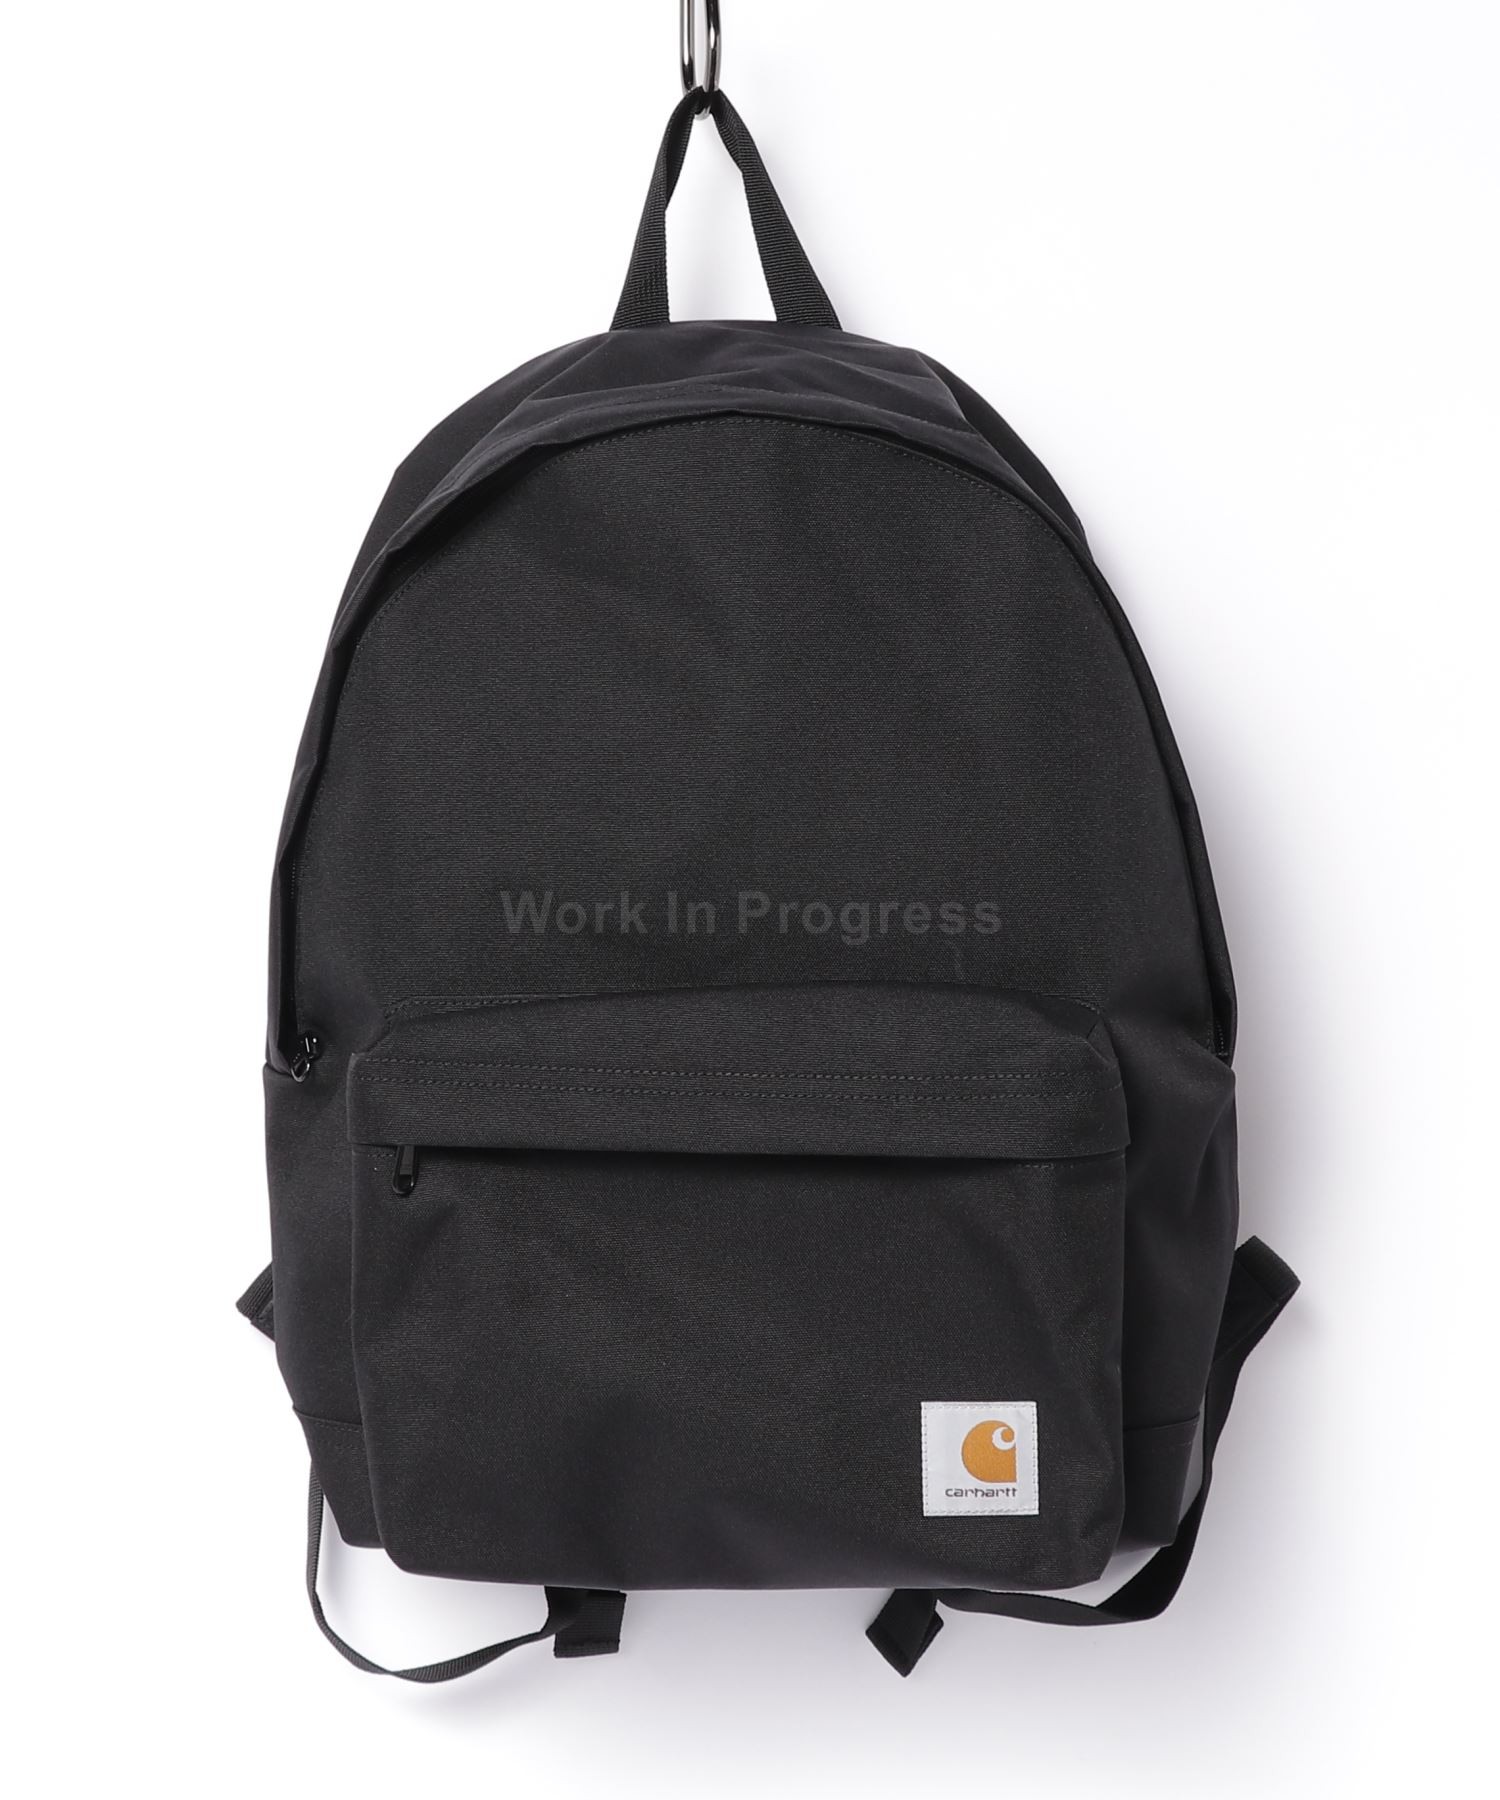 My old man knows me too well. A belated birthday present: Carhartt WIP  Payton Backpack. : r/Carhartt